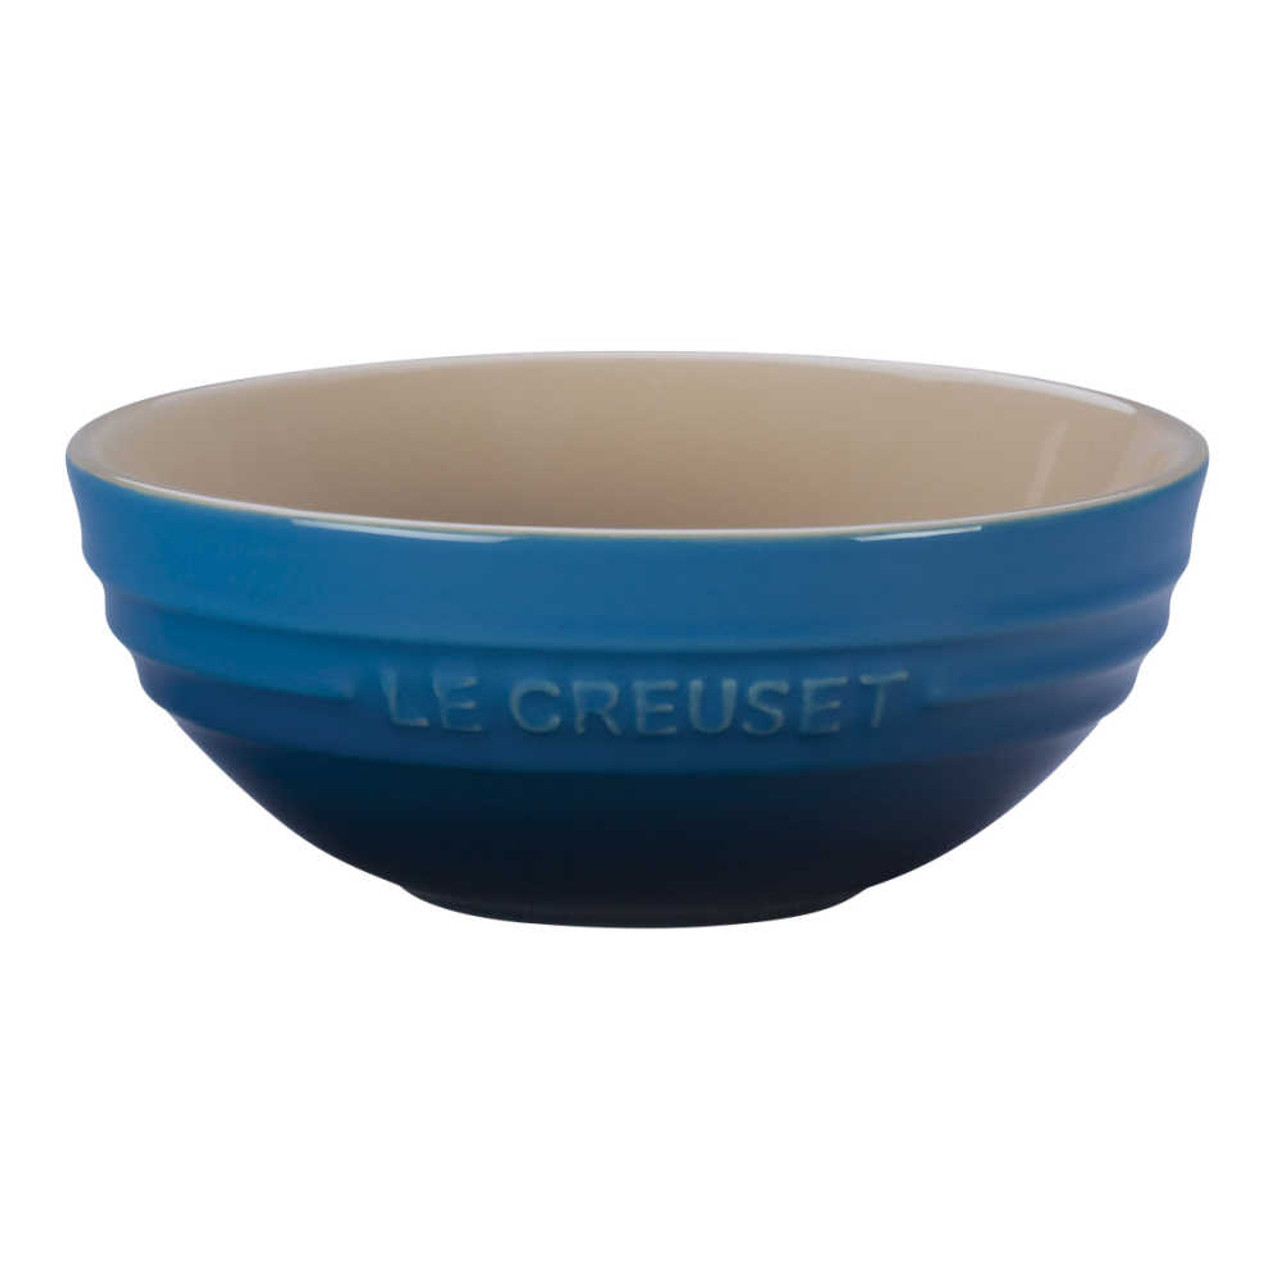 https://cdn11.bigcommerce.com/s-hccytny0od/images/stencil/1280x1280/products/4137/15496/le-creuset-multi-bowl-marseille__45849.1626984371.jpg?c=2?imbypass=on